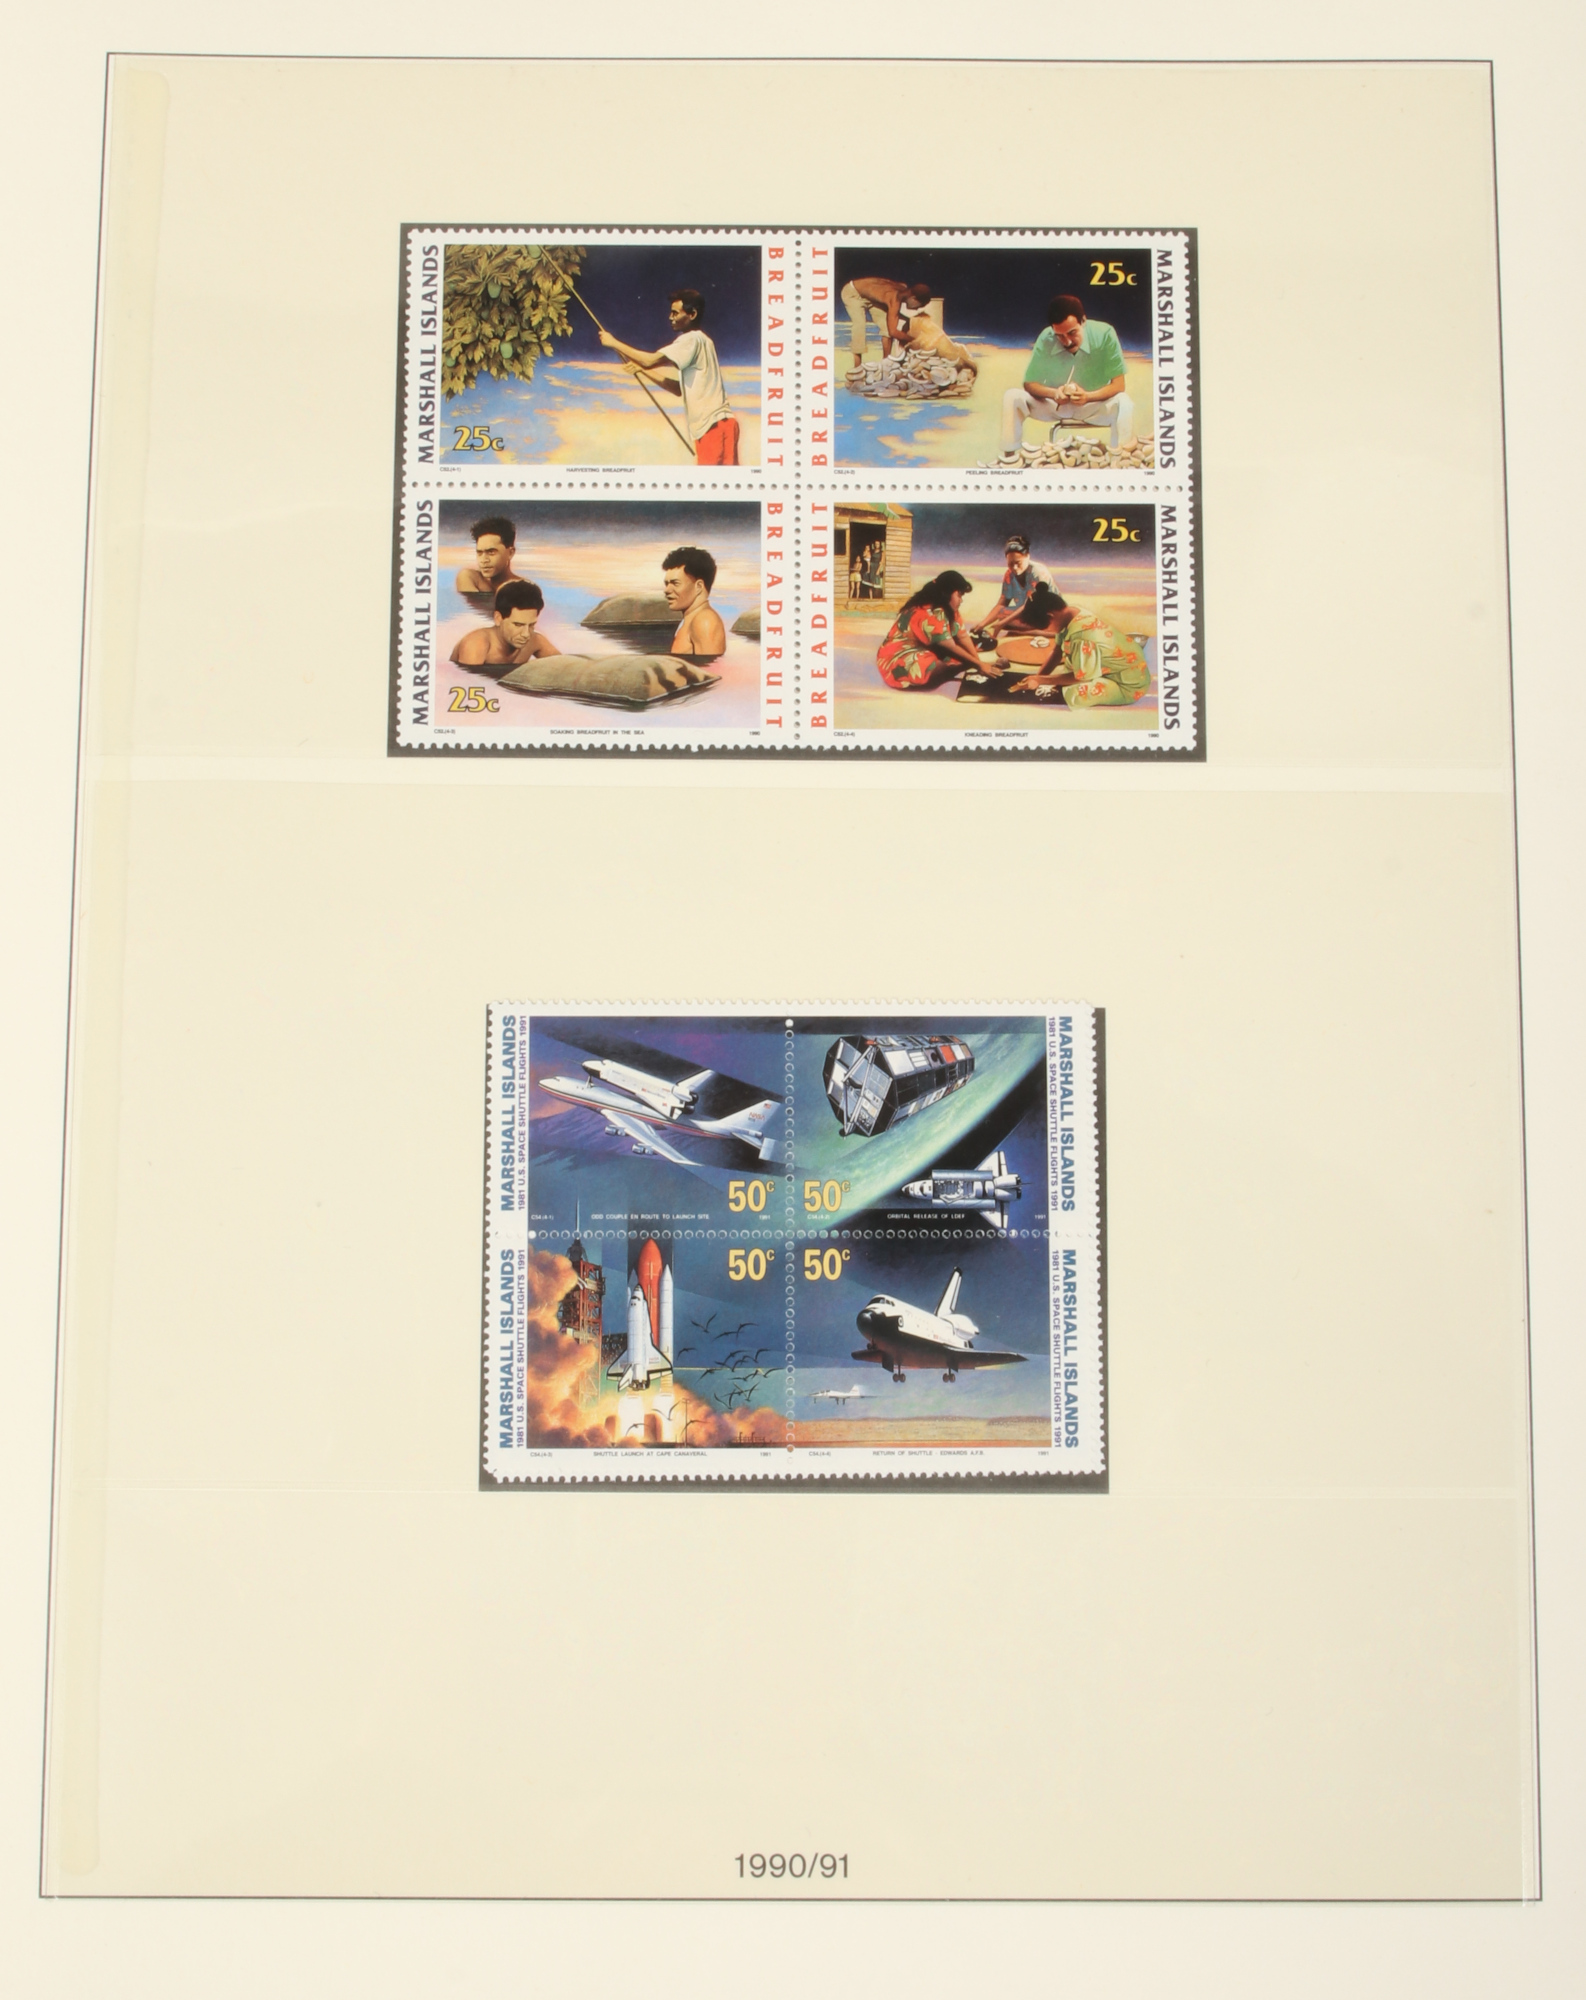 An album of Marshall island stamps. - Image 2 of 2